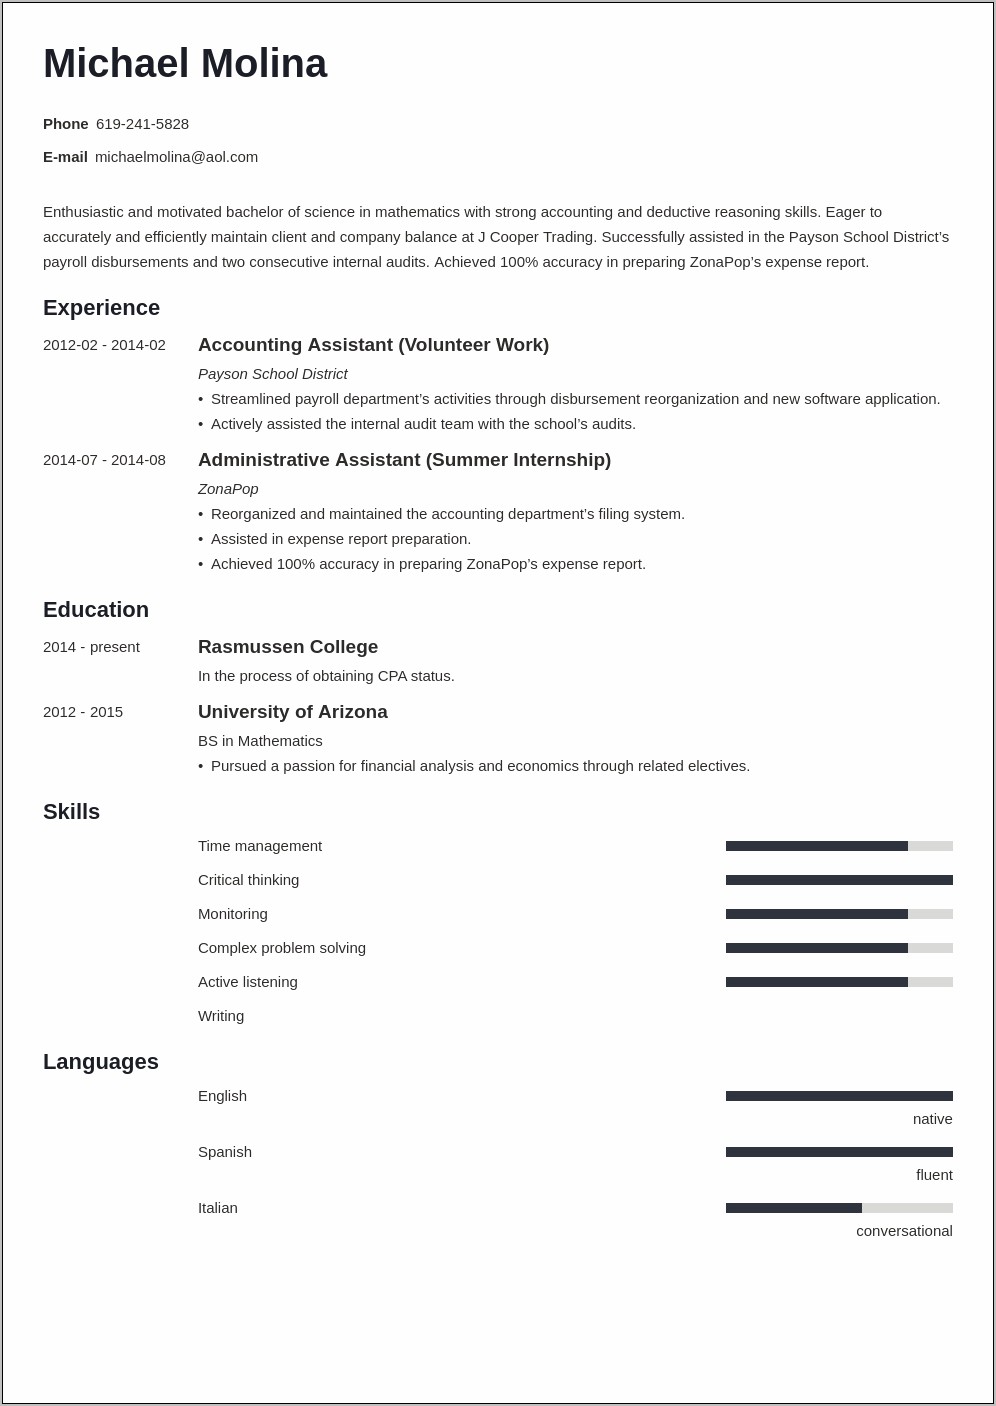 Entry Level Staff Accountant Resume Objective